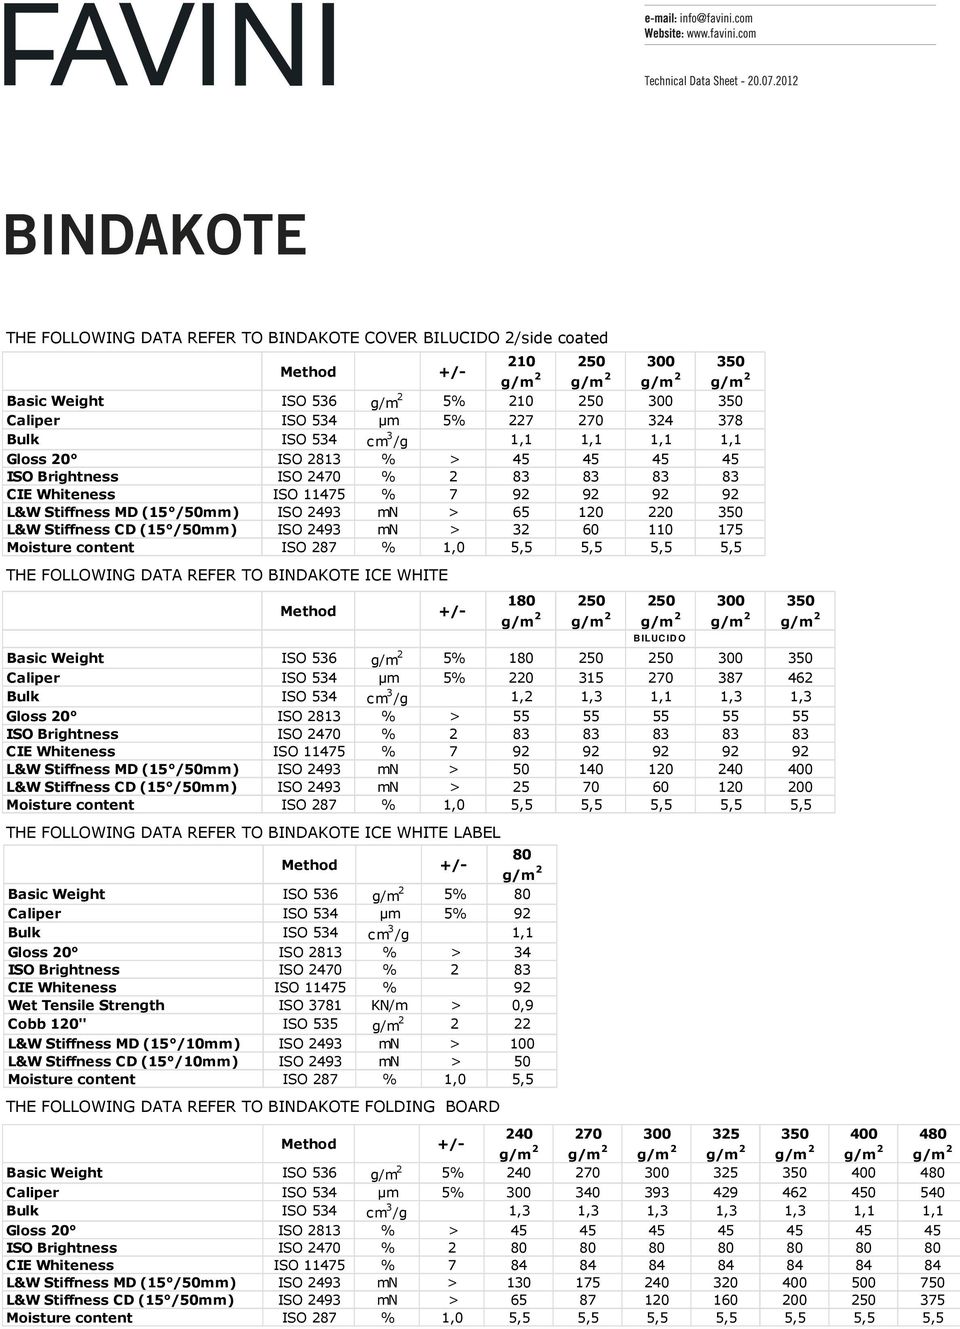 ISO 2493 mn > 32 60 110 175 Moisture content ISO 287 % 1,0 5,5 5,5 5,5 5,5 THE FOLLOWING DATA REFER TO BINDAKOTE ICE WHITE THE FOLLOWING DATA REFER TO BINDAKOTE FOLDING BOARD 180 250 250 300 350